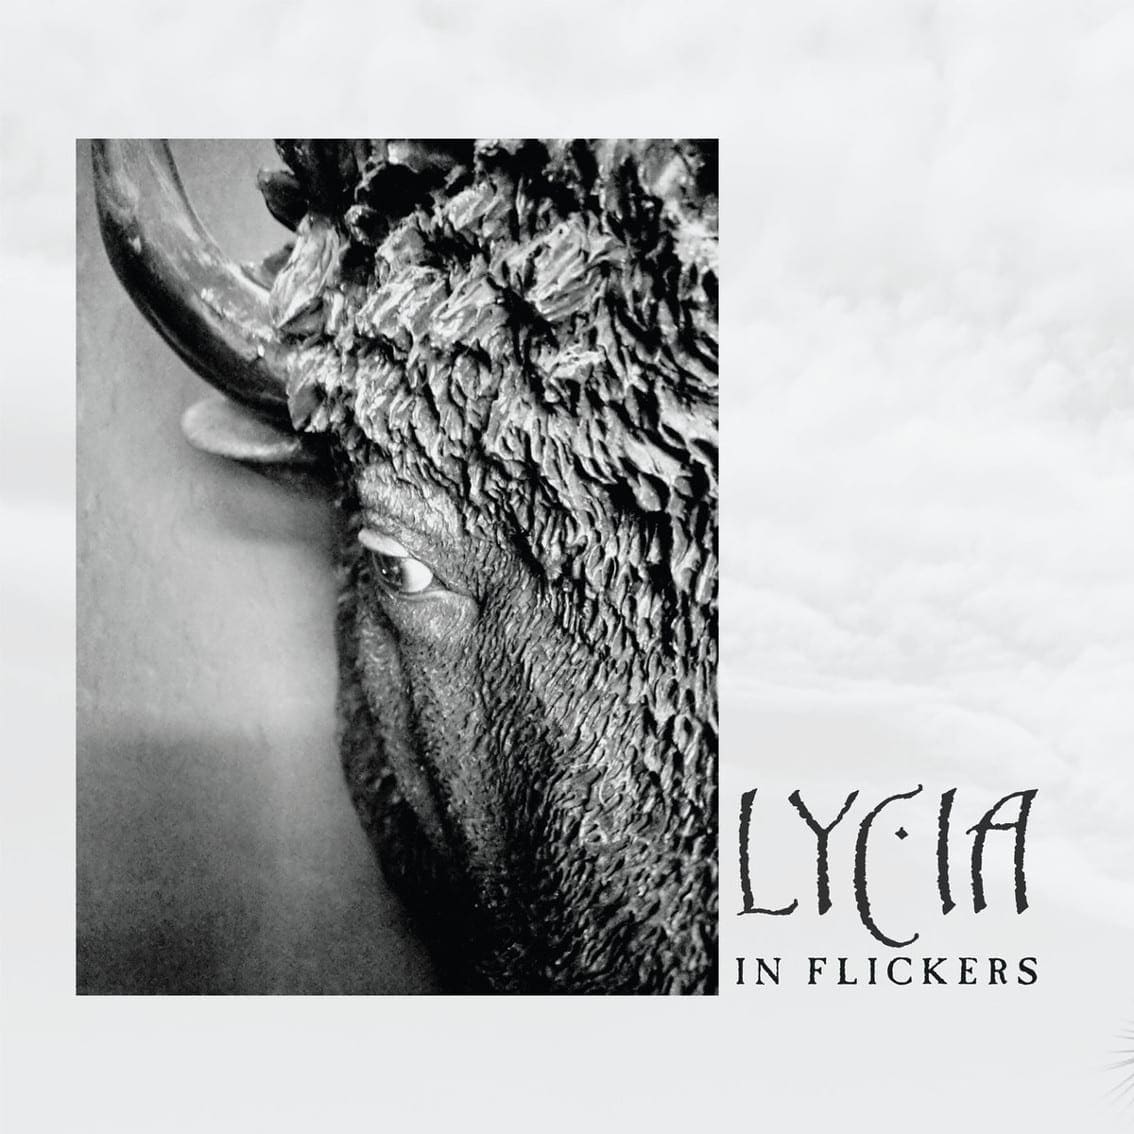 Exclusive premiere of Lycia's 'The song is Autumn Into Winter' on Side-Line !